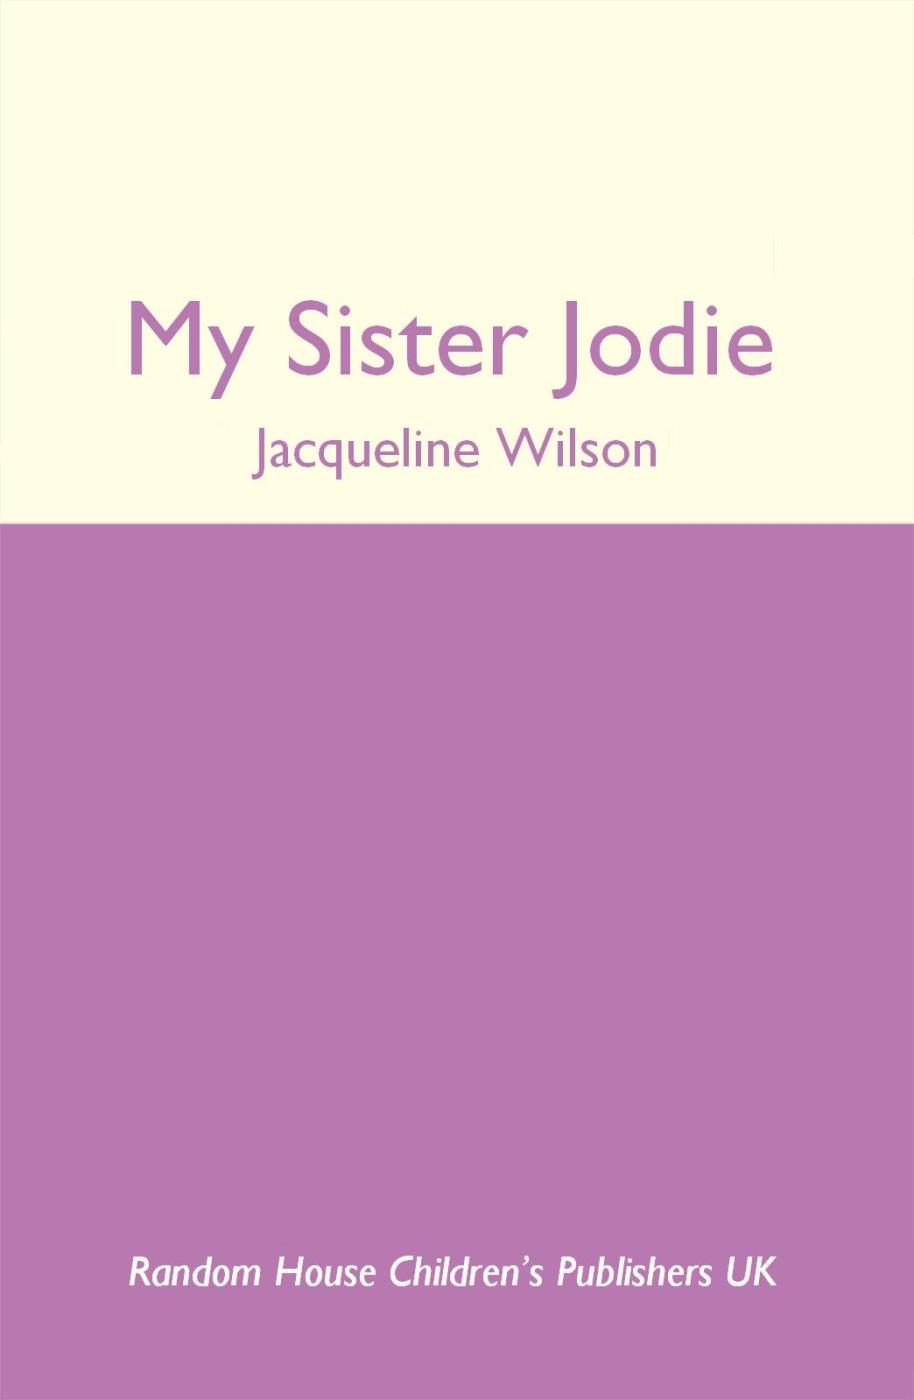 My Sister Jodie (2009) by Jacqueline Wilson